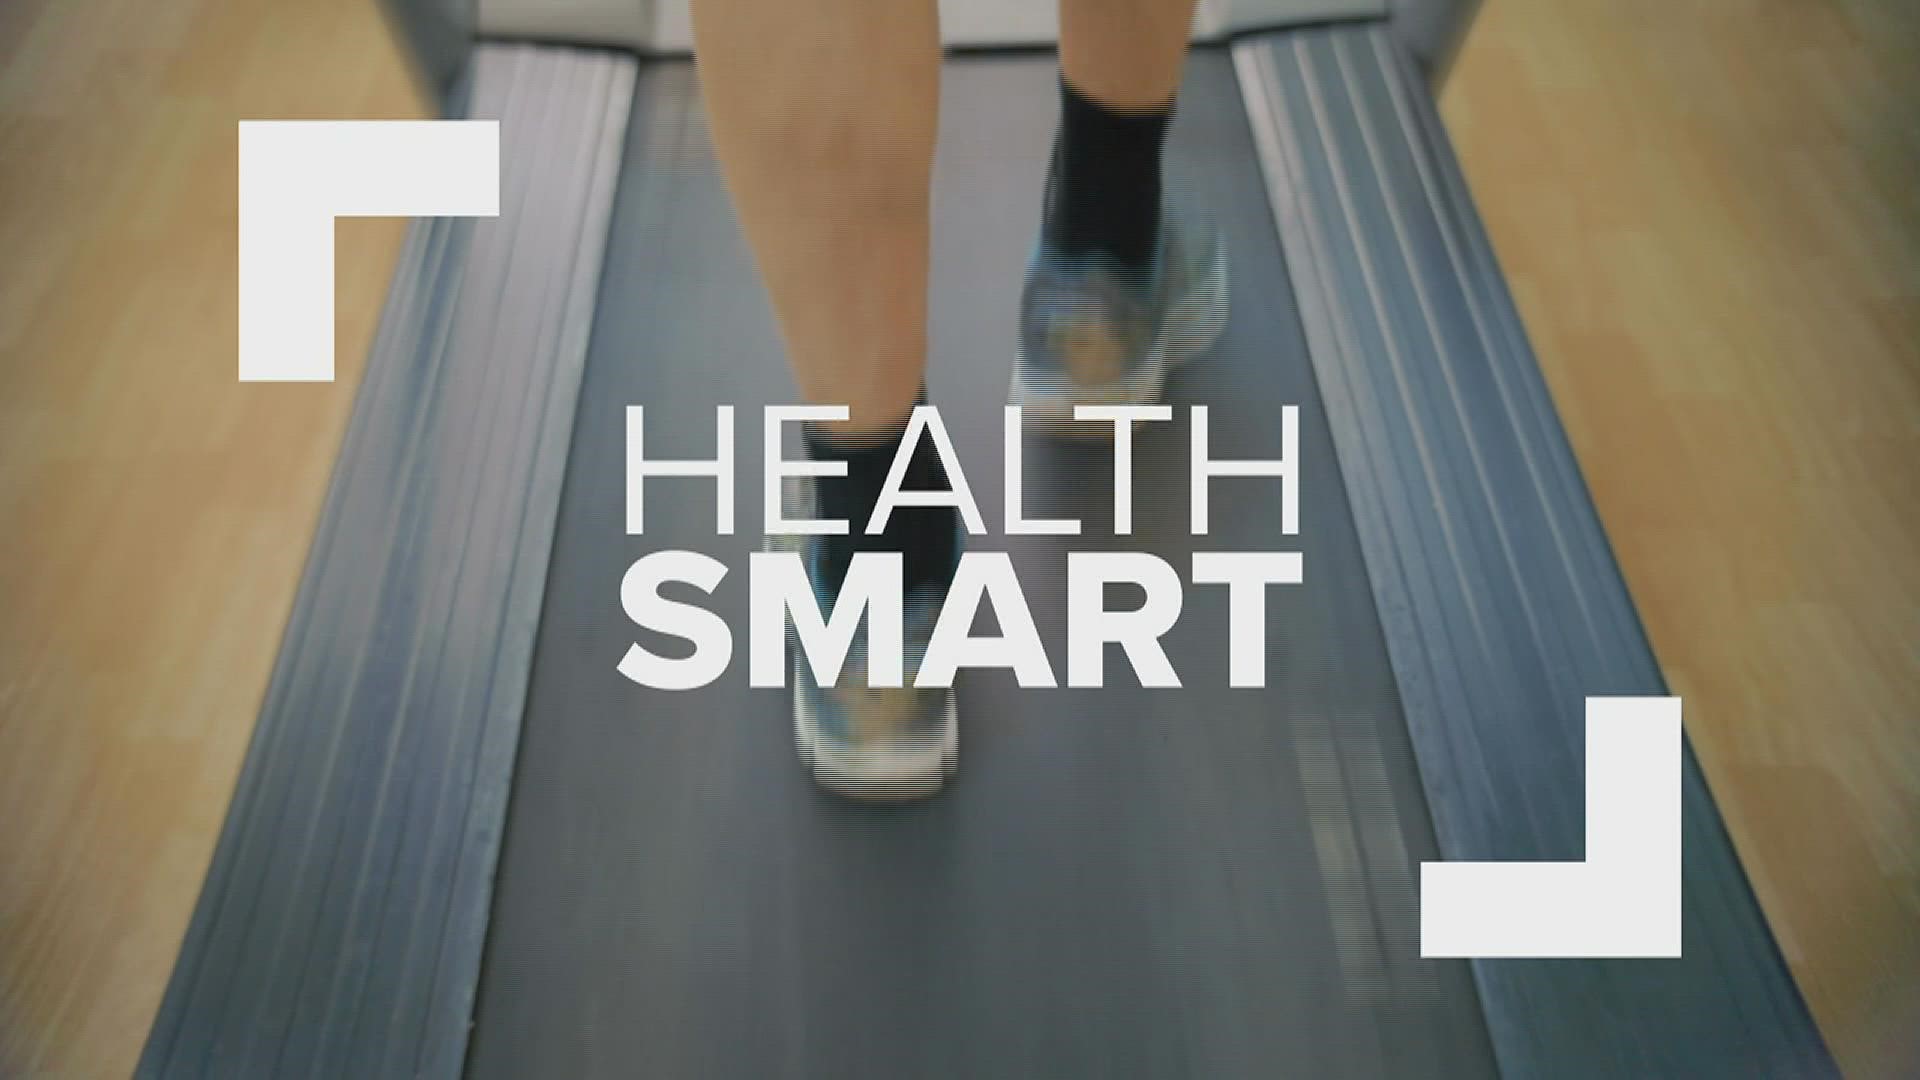 A look at three of the top health stories in the news from the last week to keep you Health Smart.